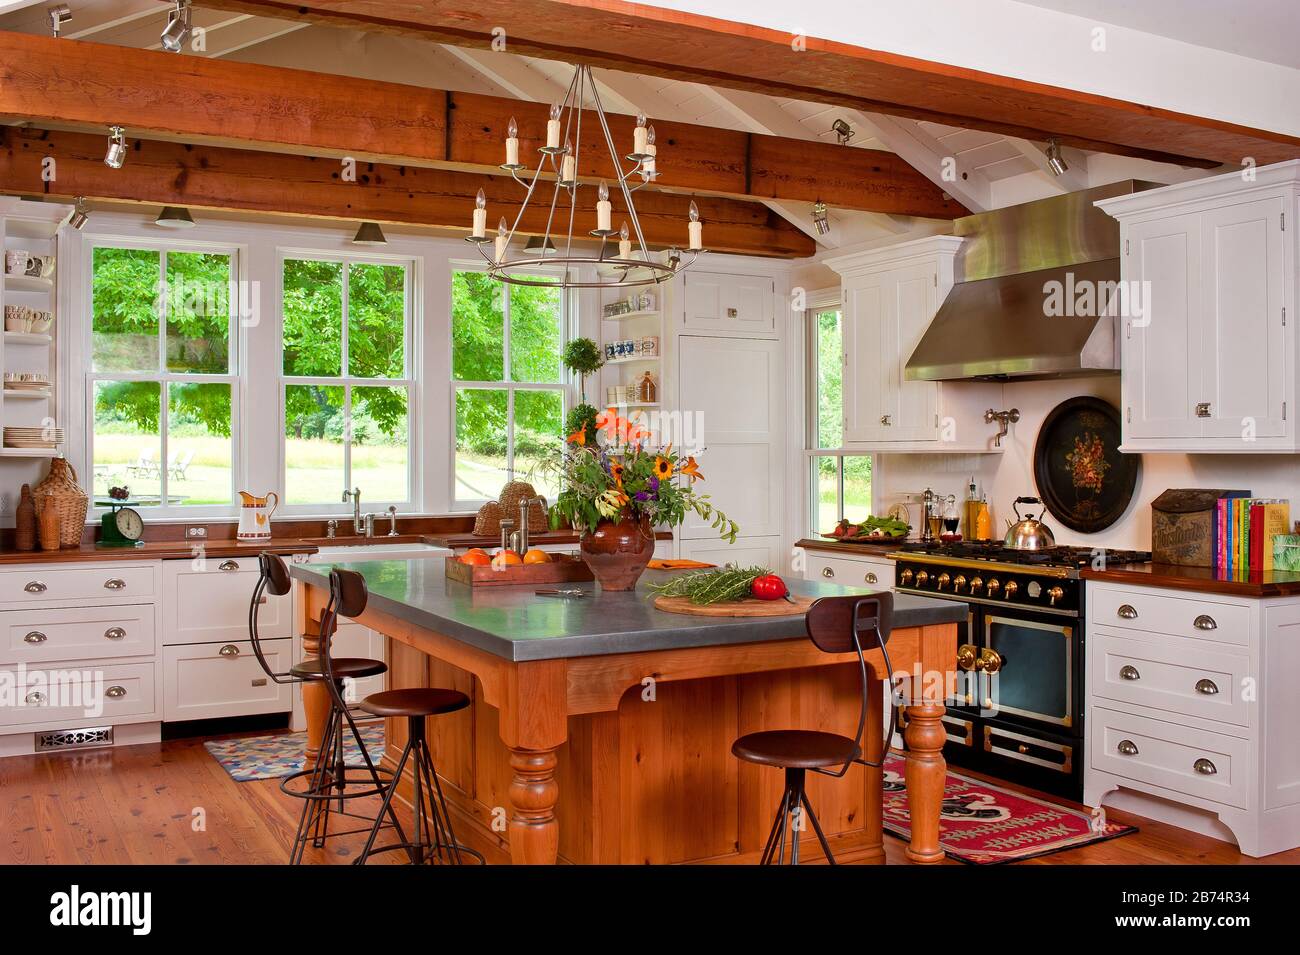 Kitchen: American country styled farmhouse, whole house tour feature Stock Photo